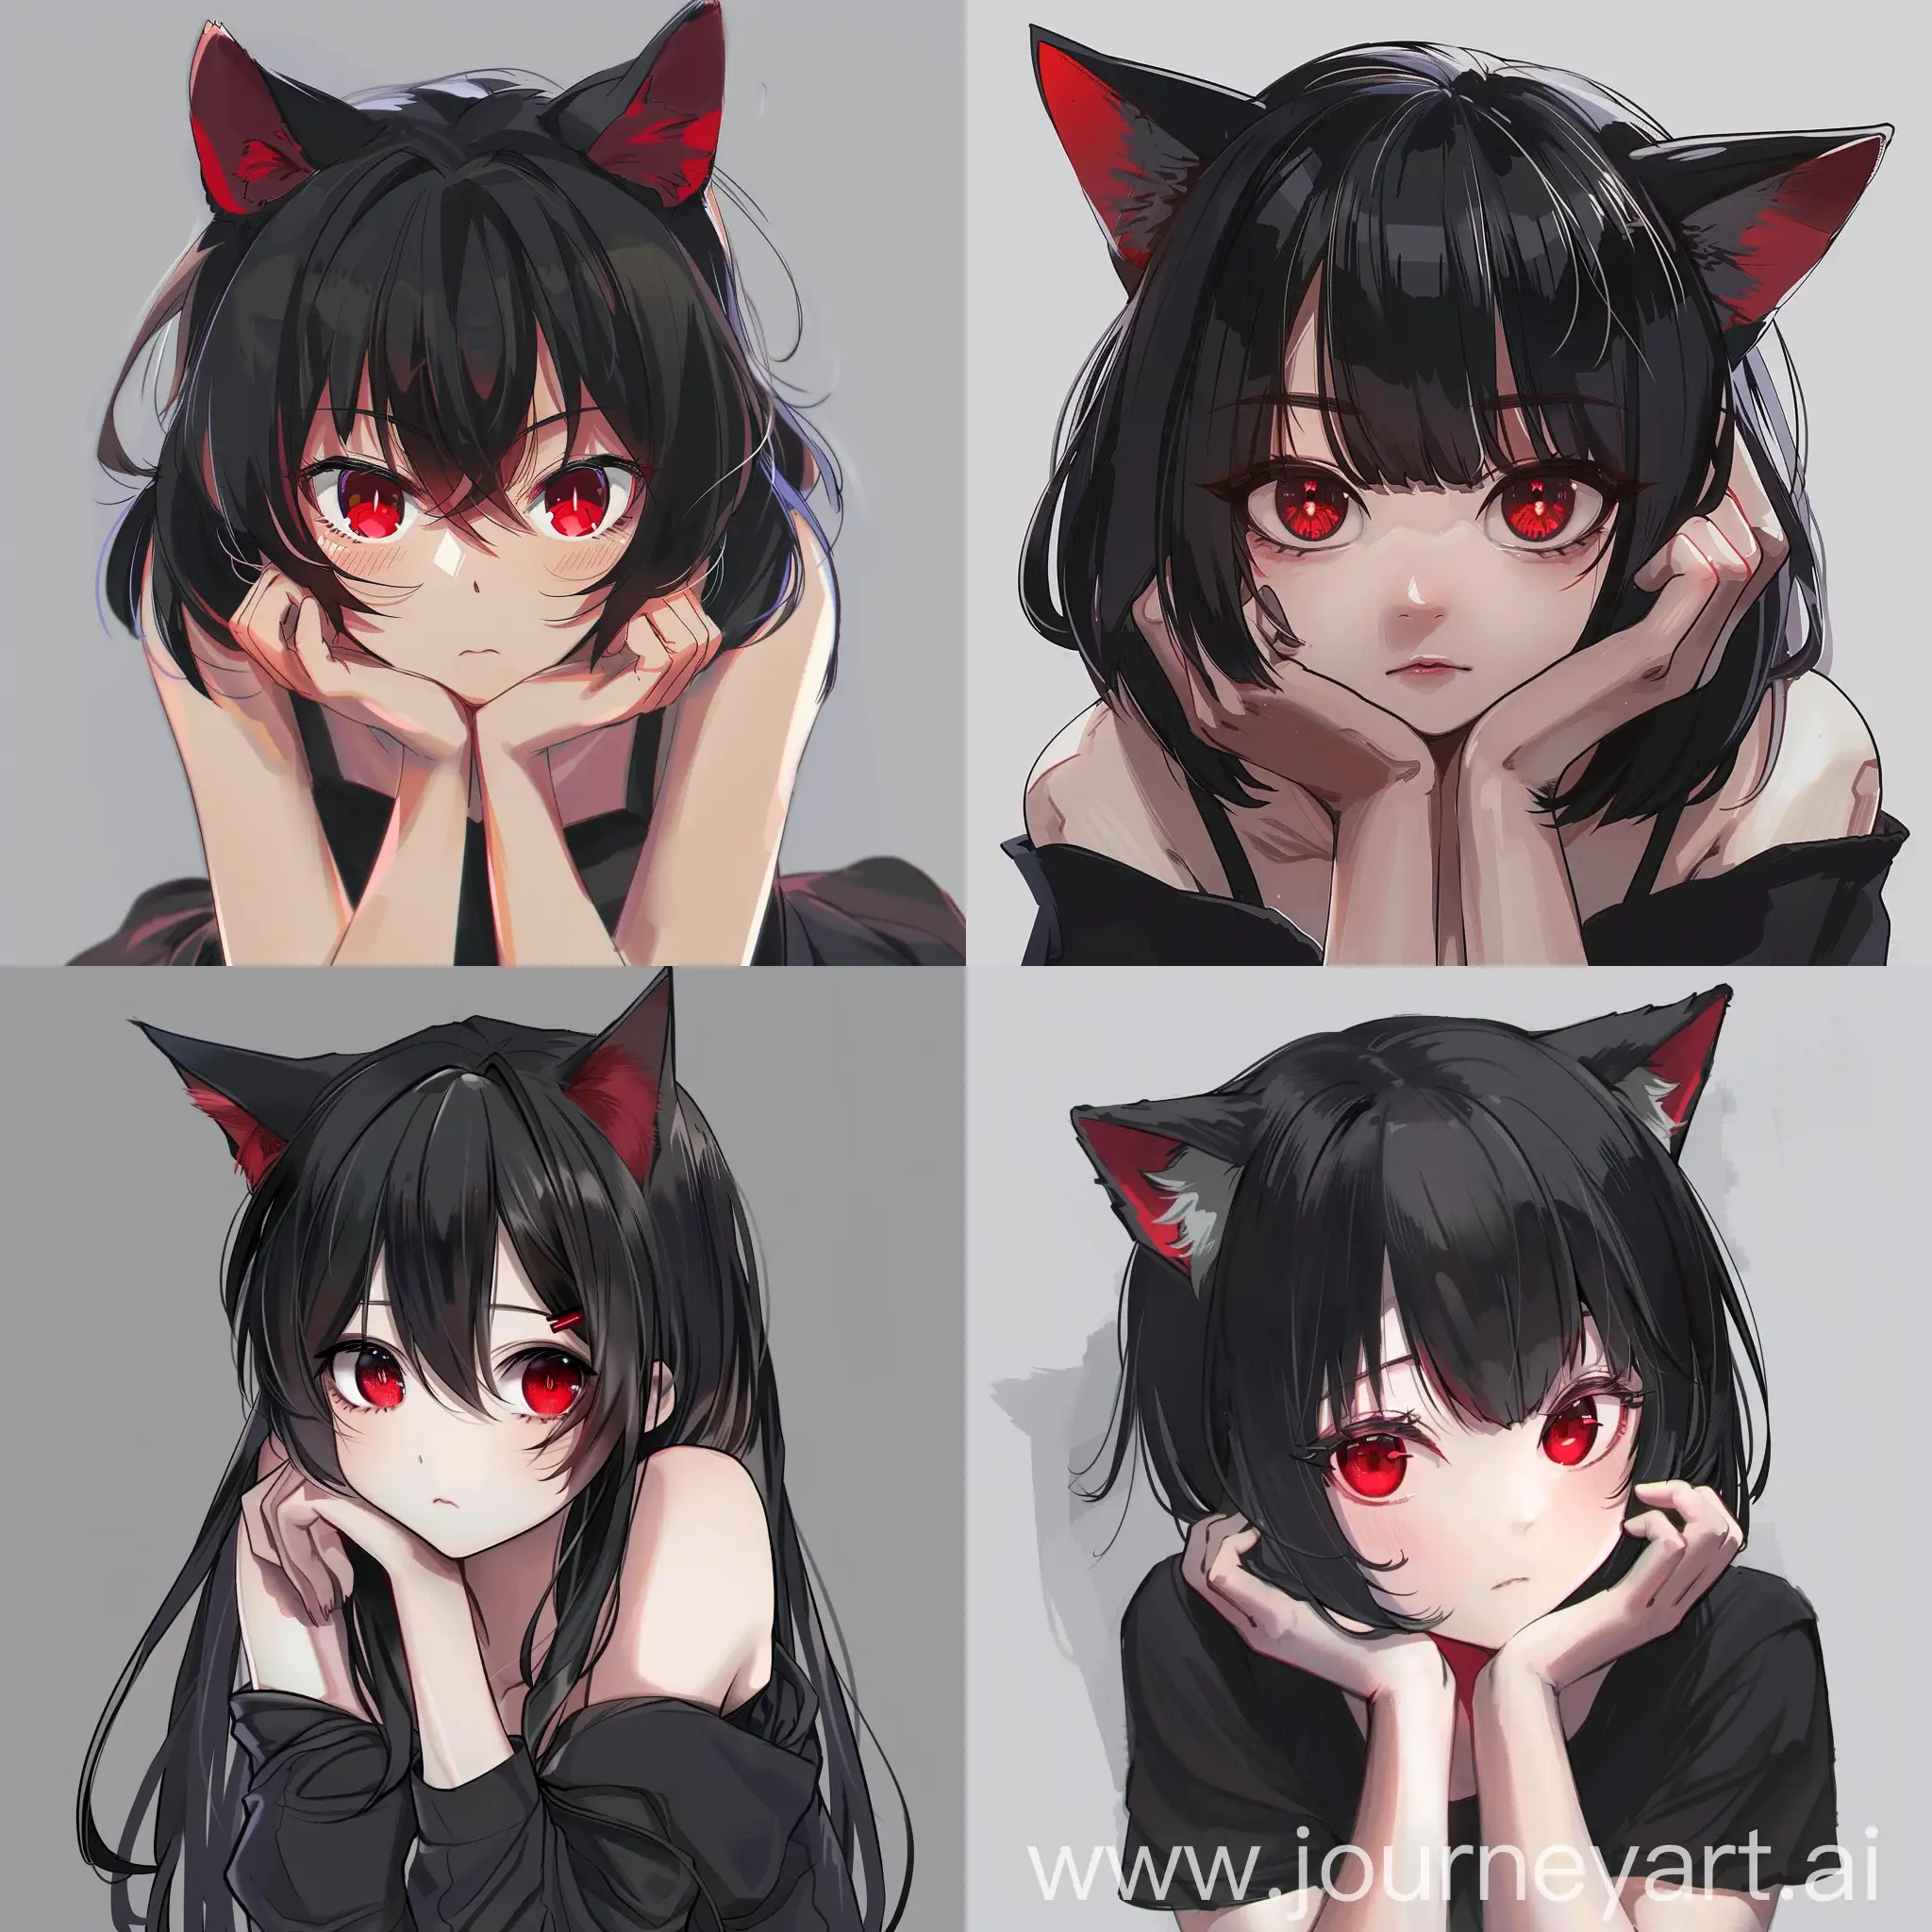 anime girl with pitch black hair and floppy cat ears and bright red eyes posing